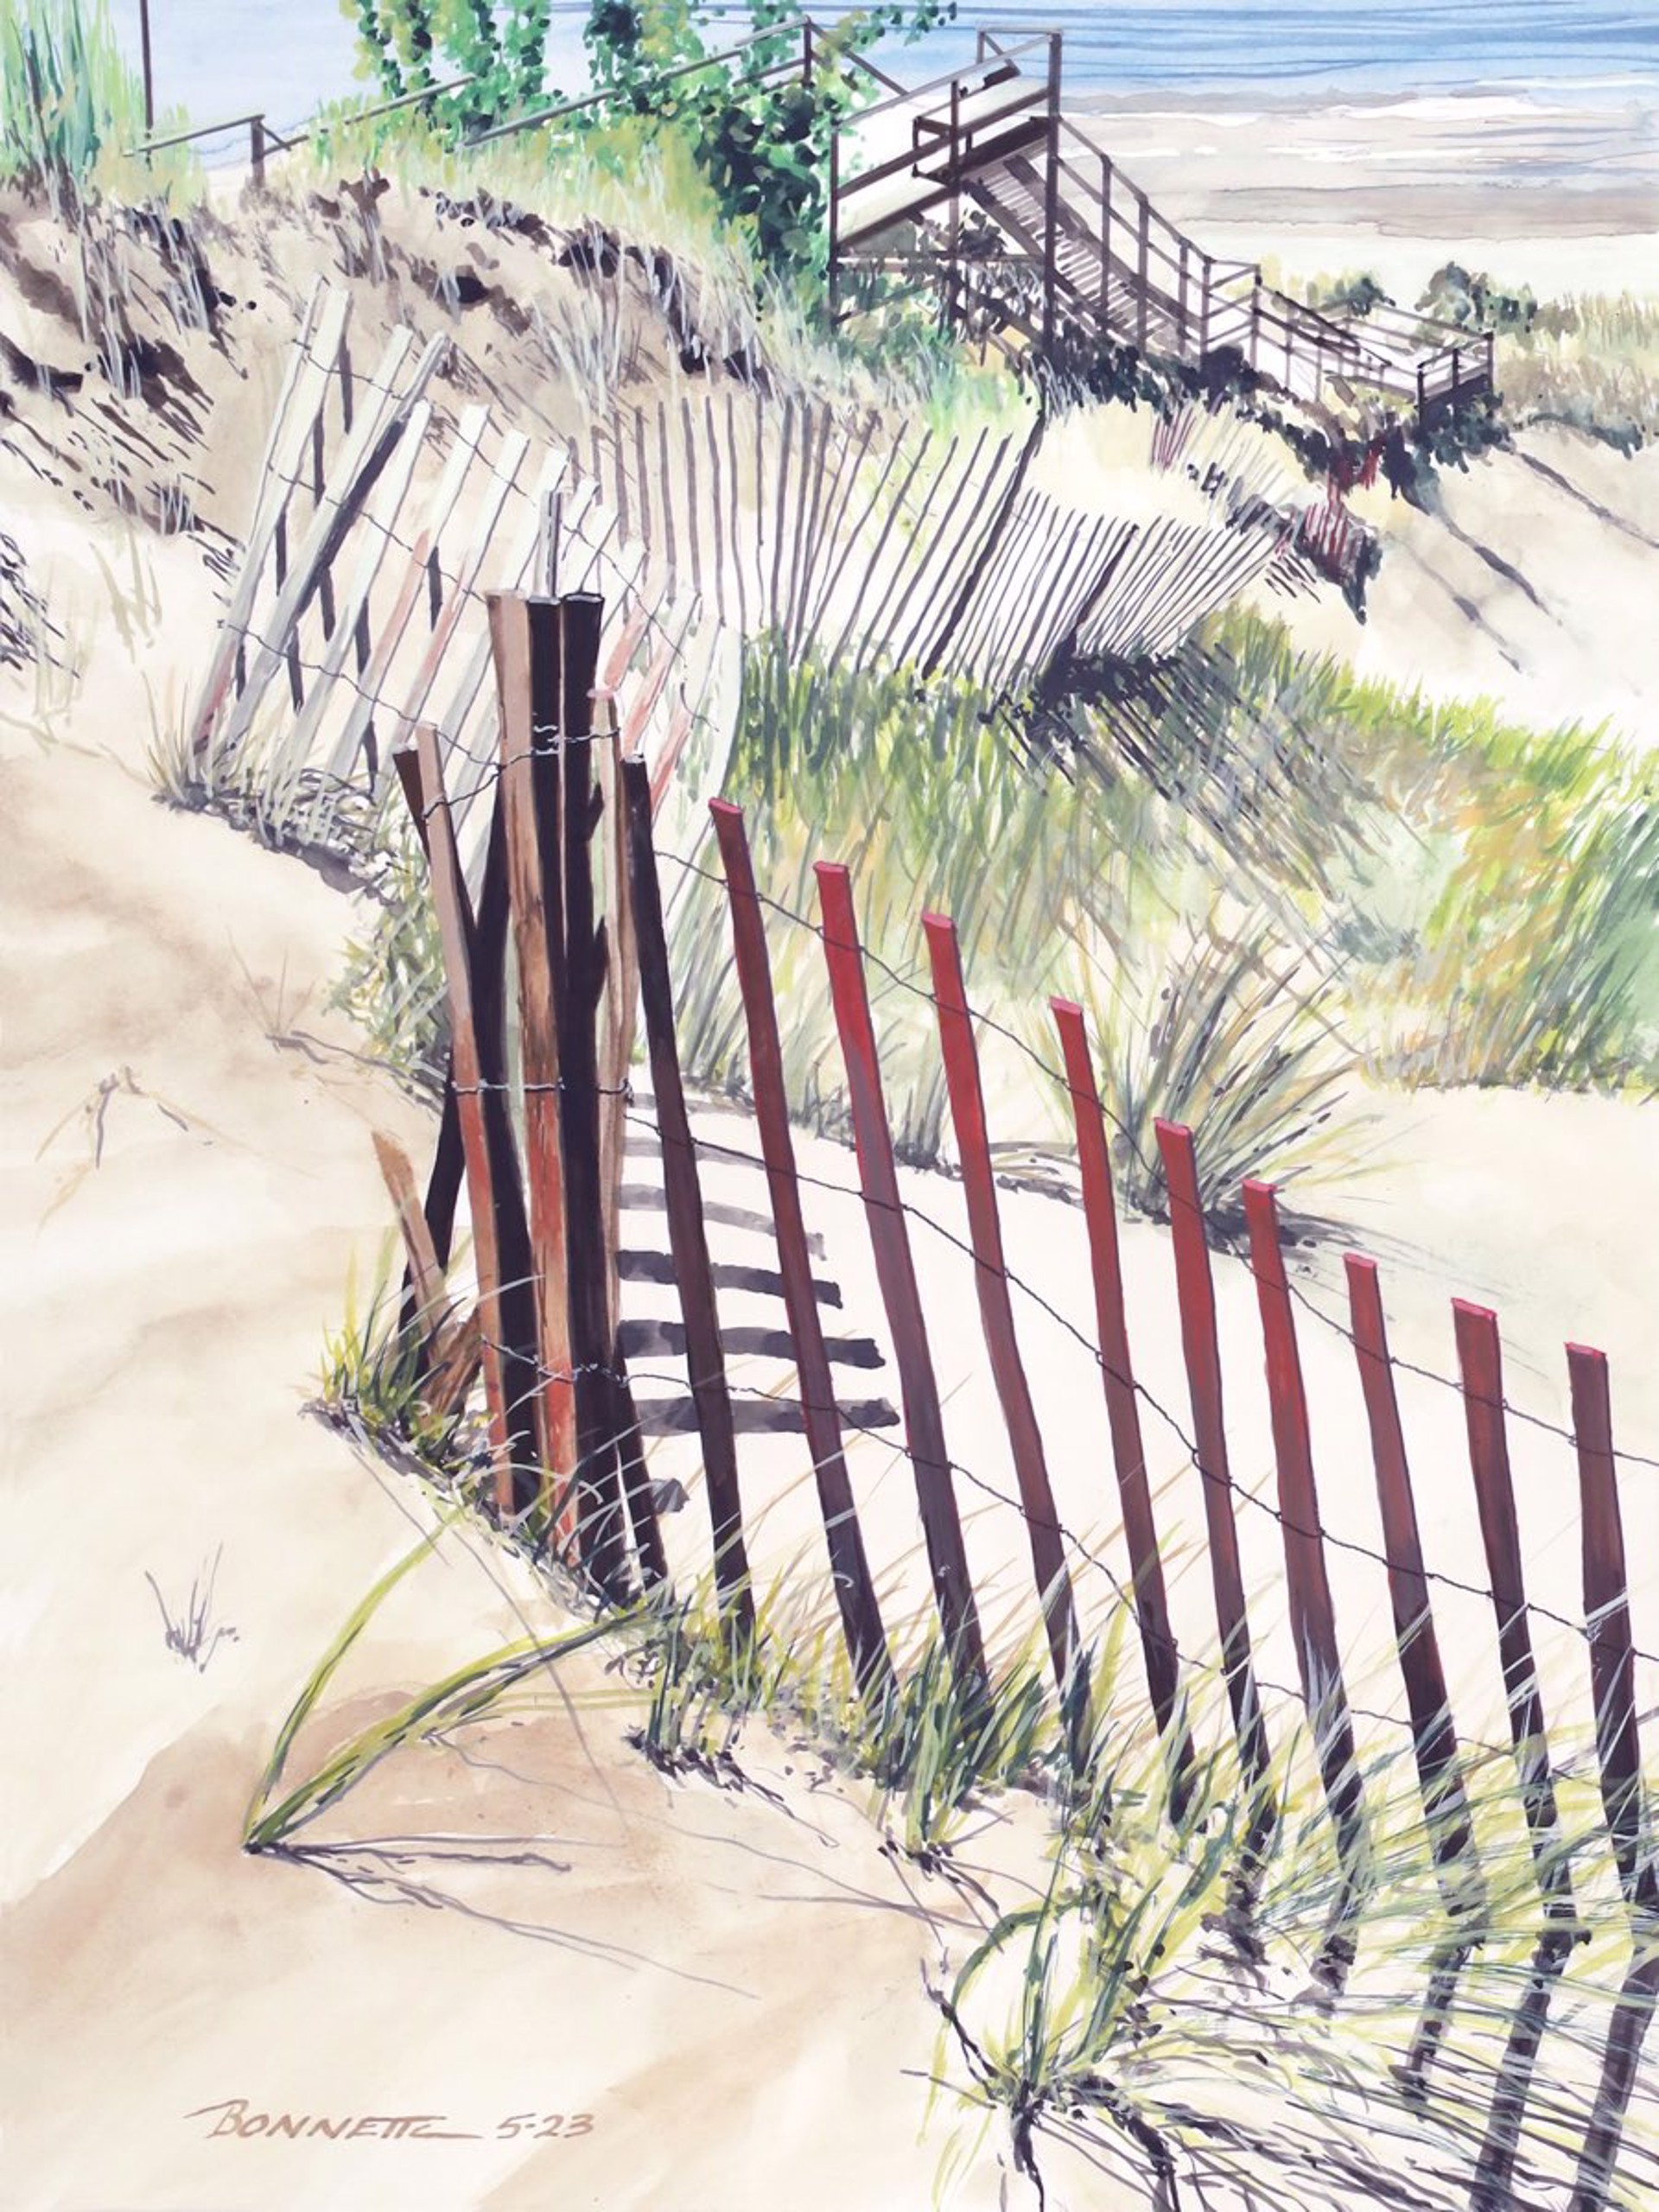 Snow Fence and Beach Stairs by Mark Bonnette